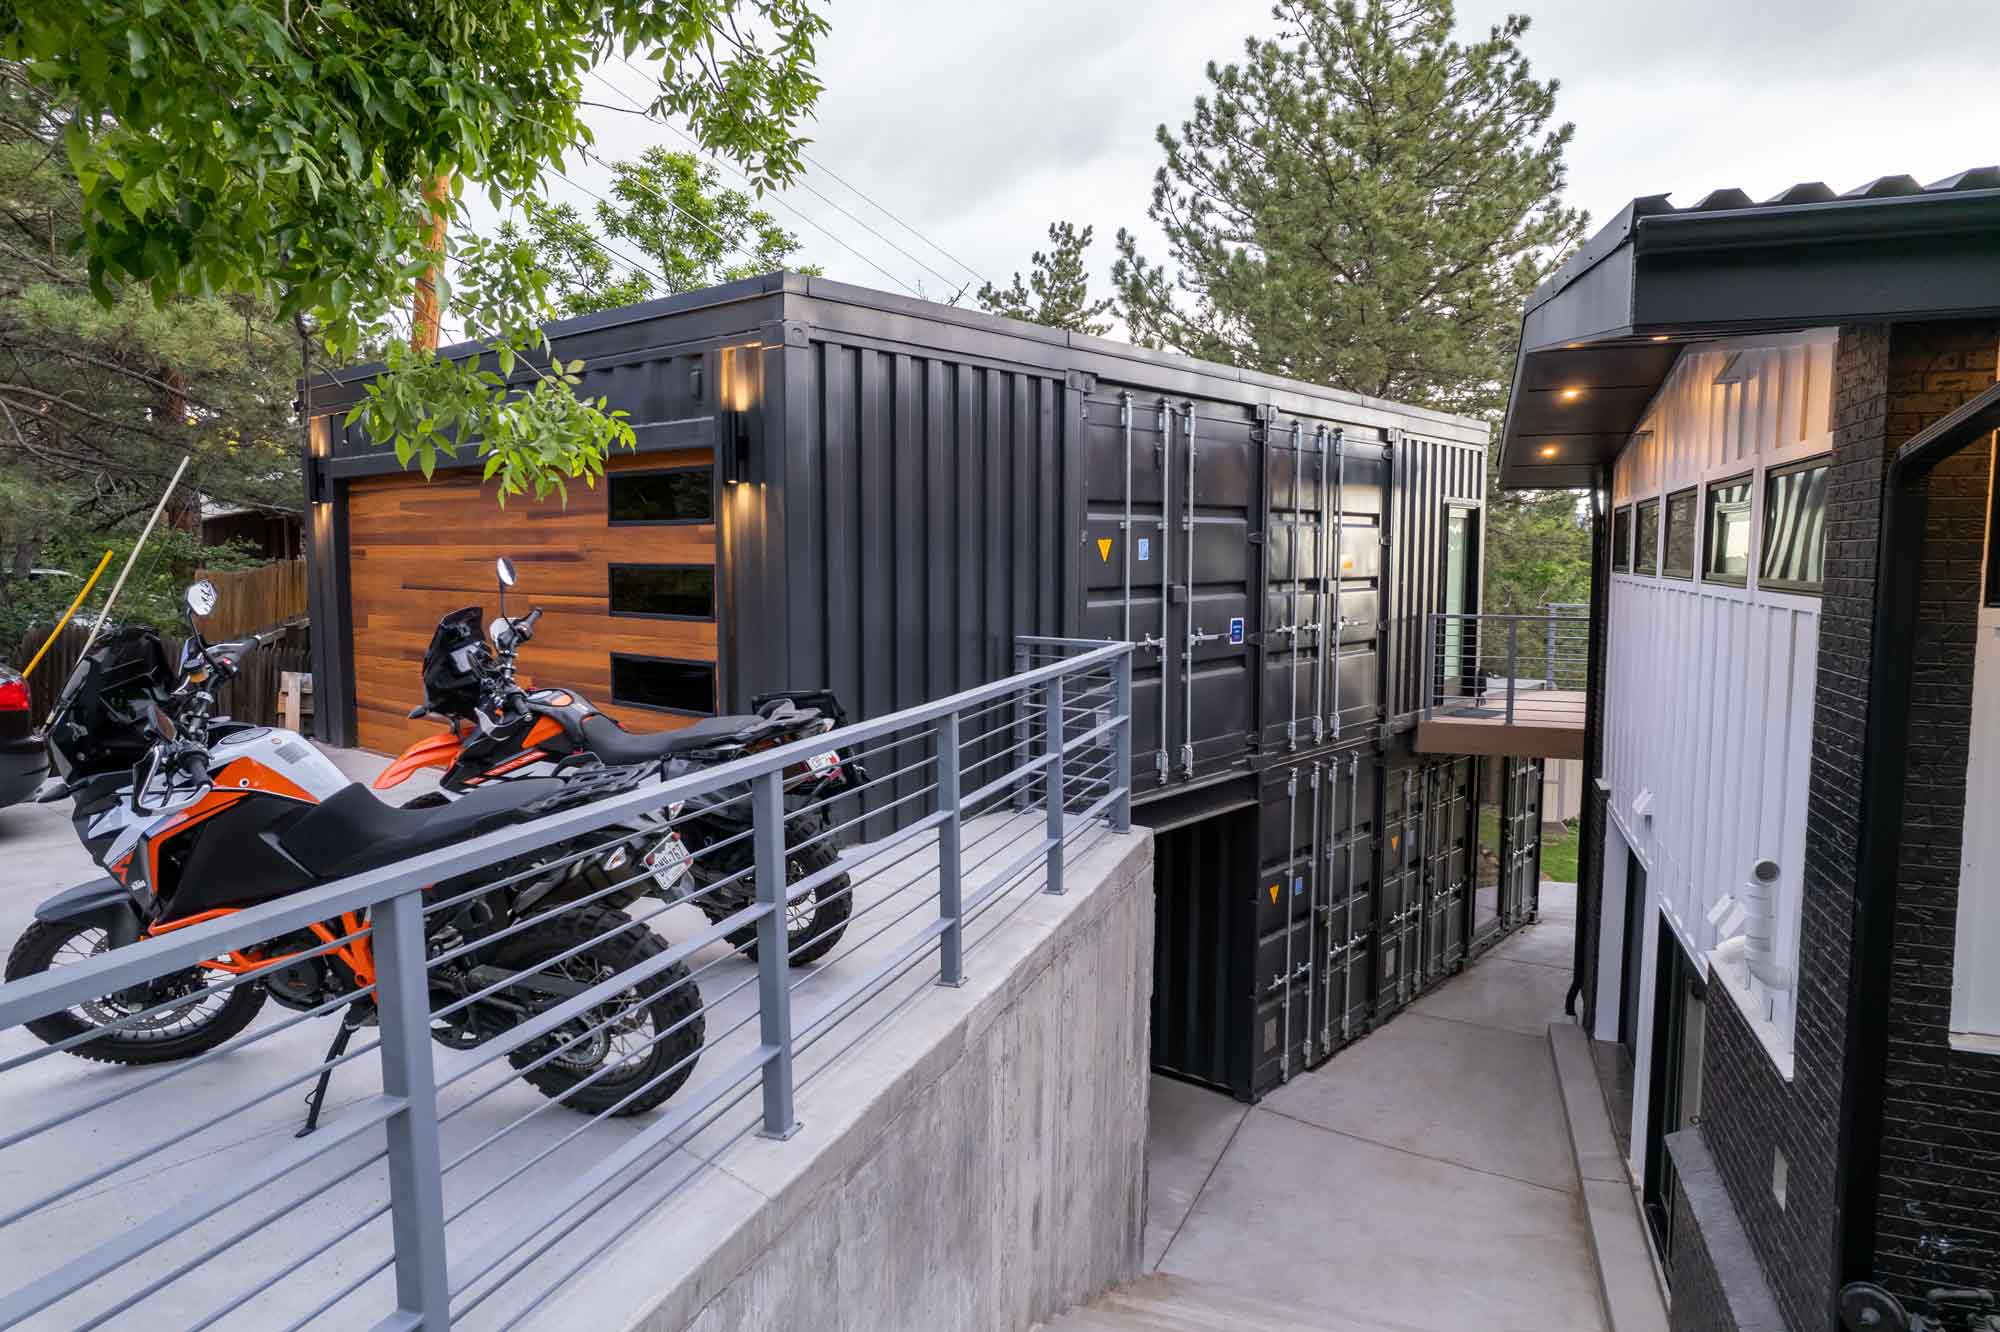 Rentable Shipping Container House Comes With Roof Deck & Garage Door